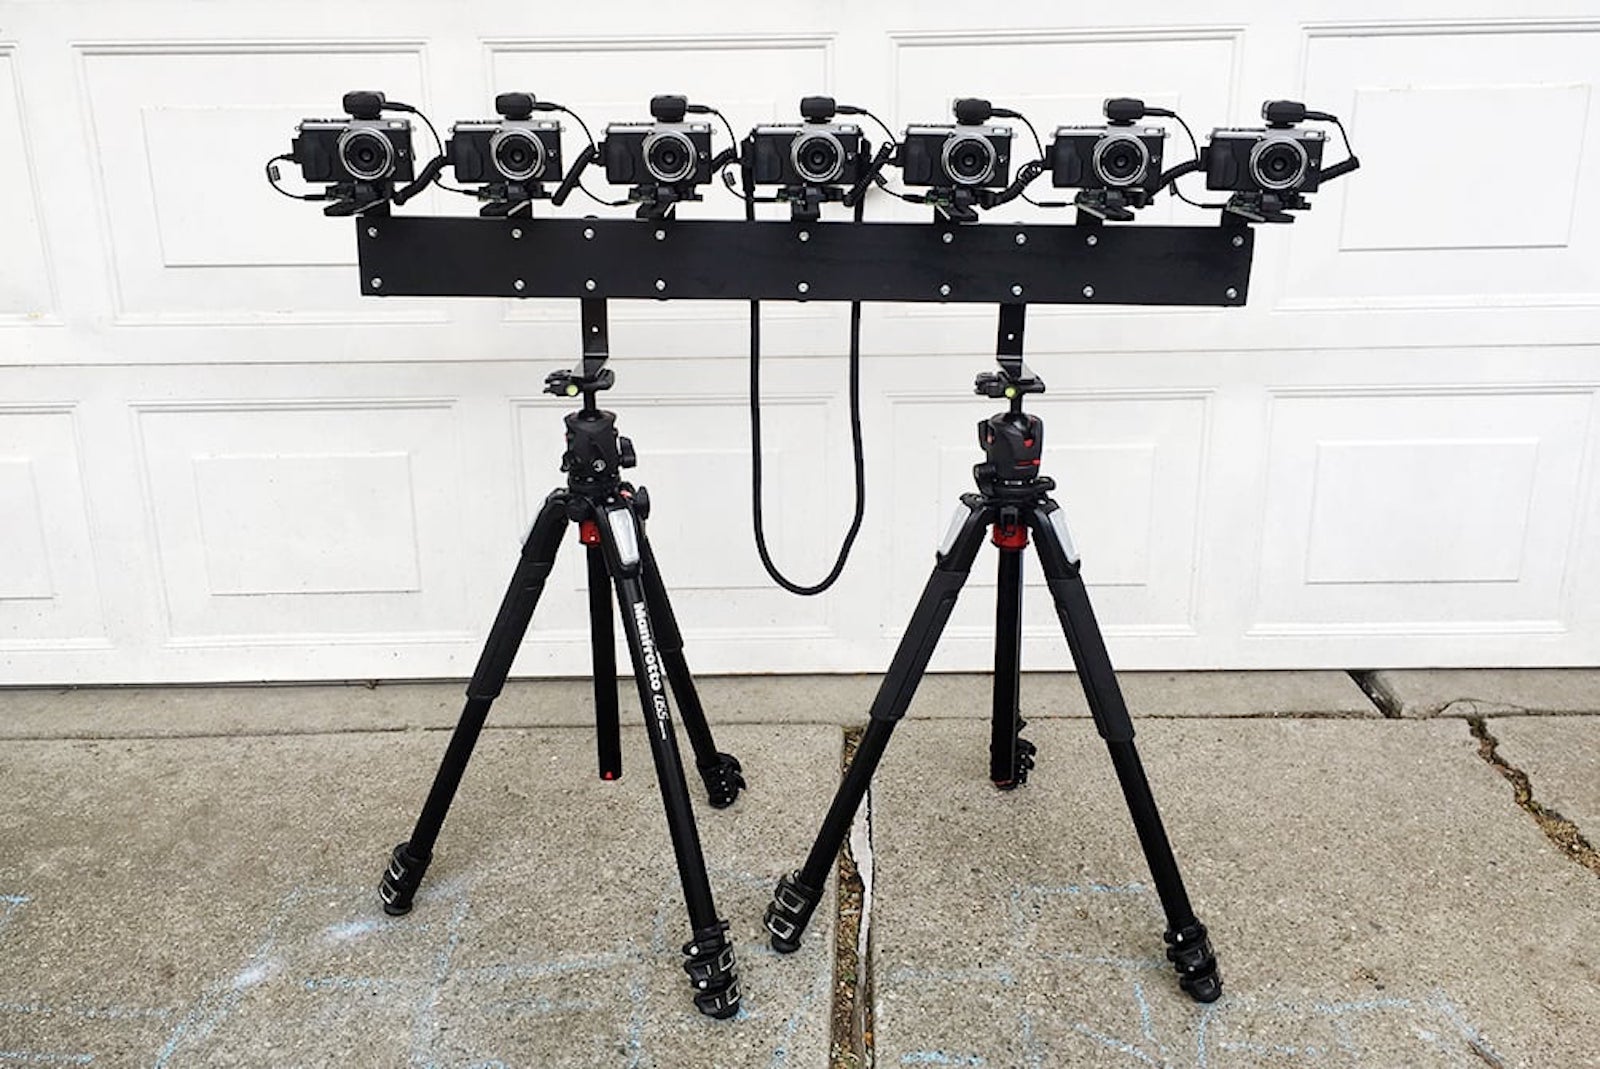 The Seven-Camera GIF Rig: Taking Wedding Photography to a New Level